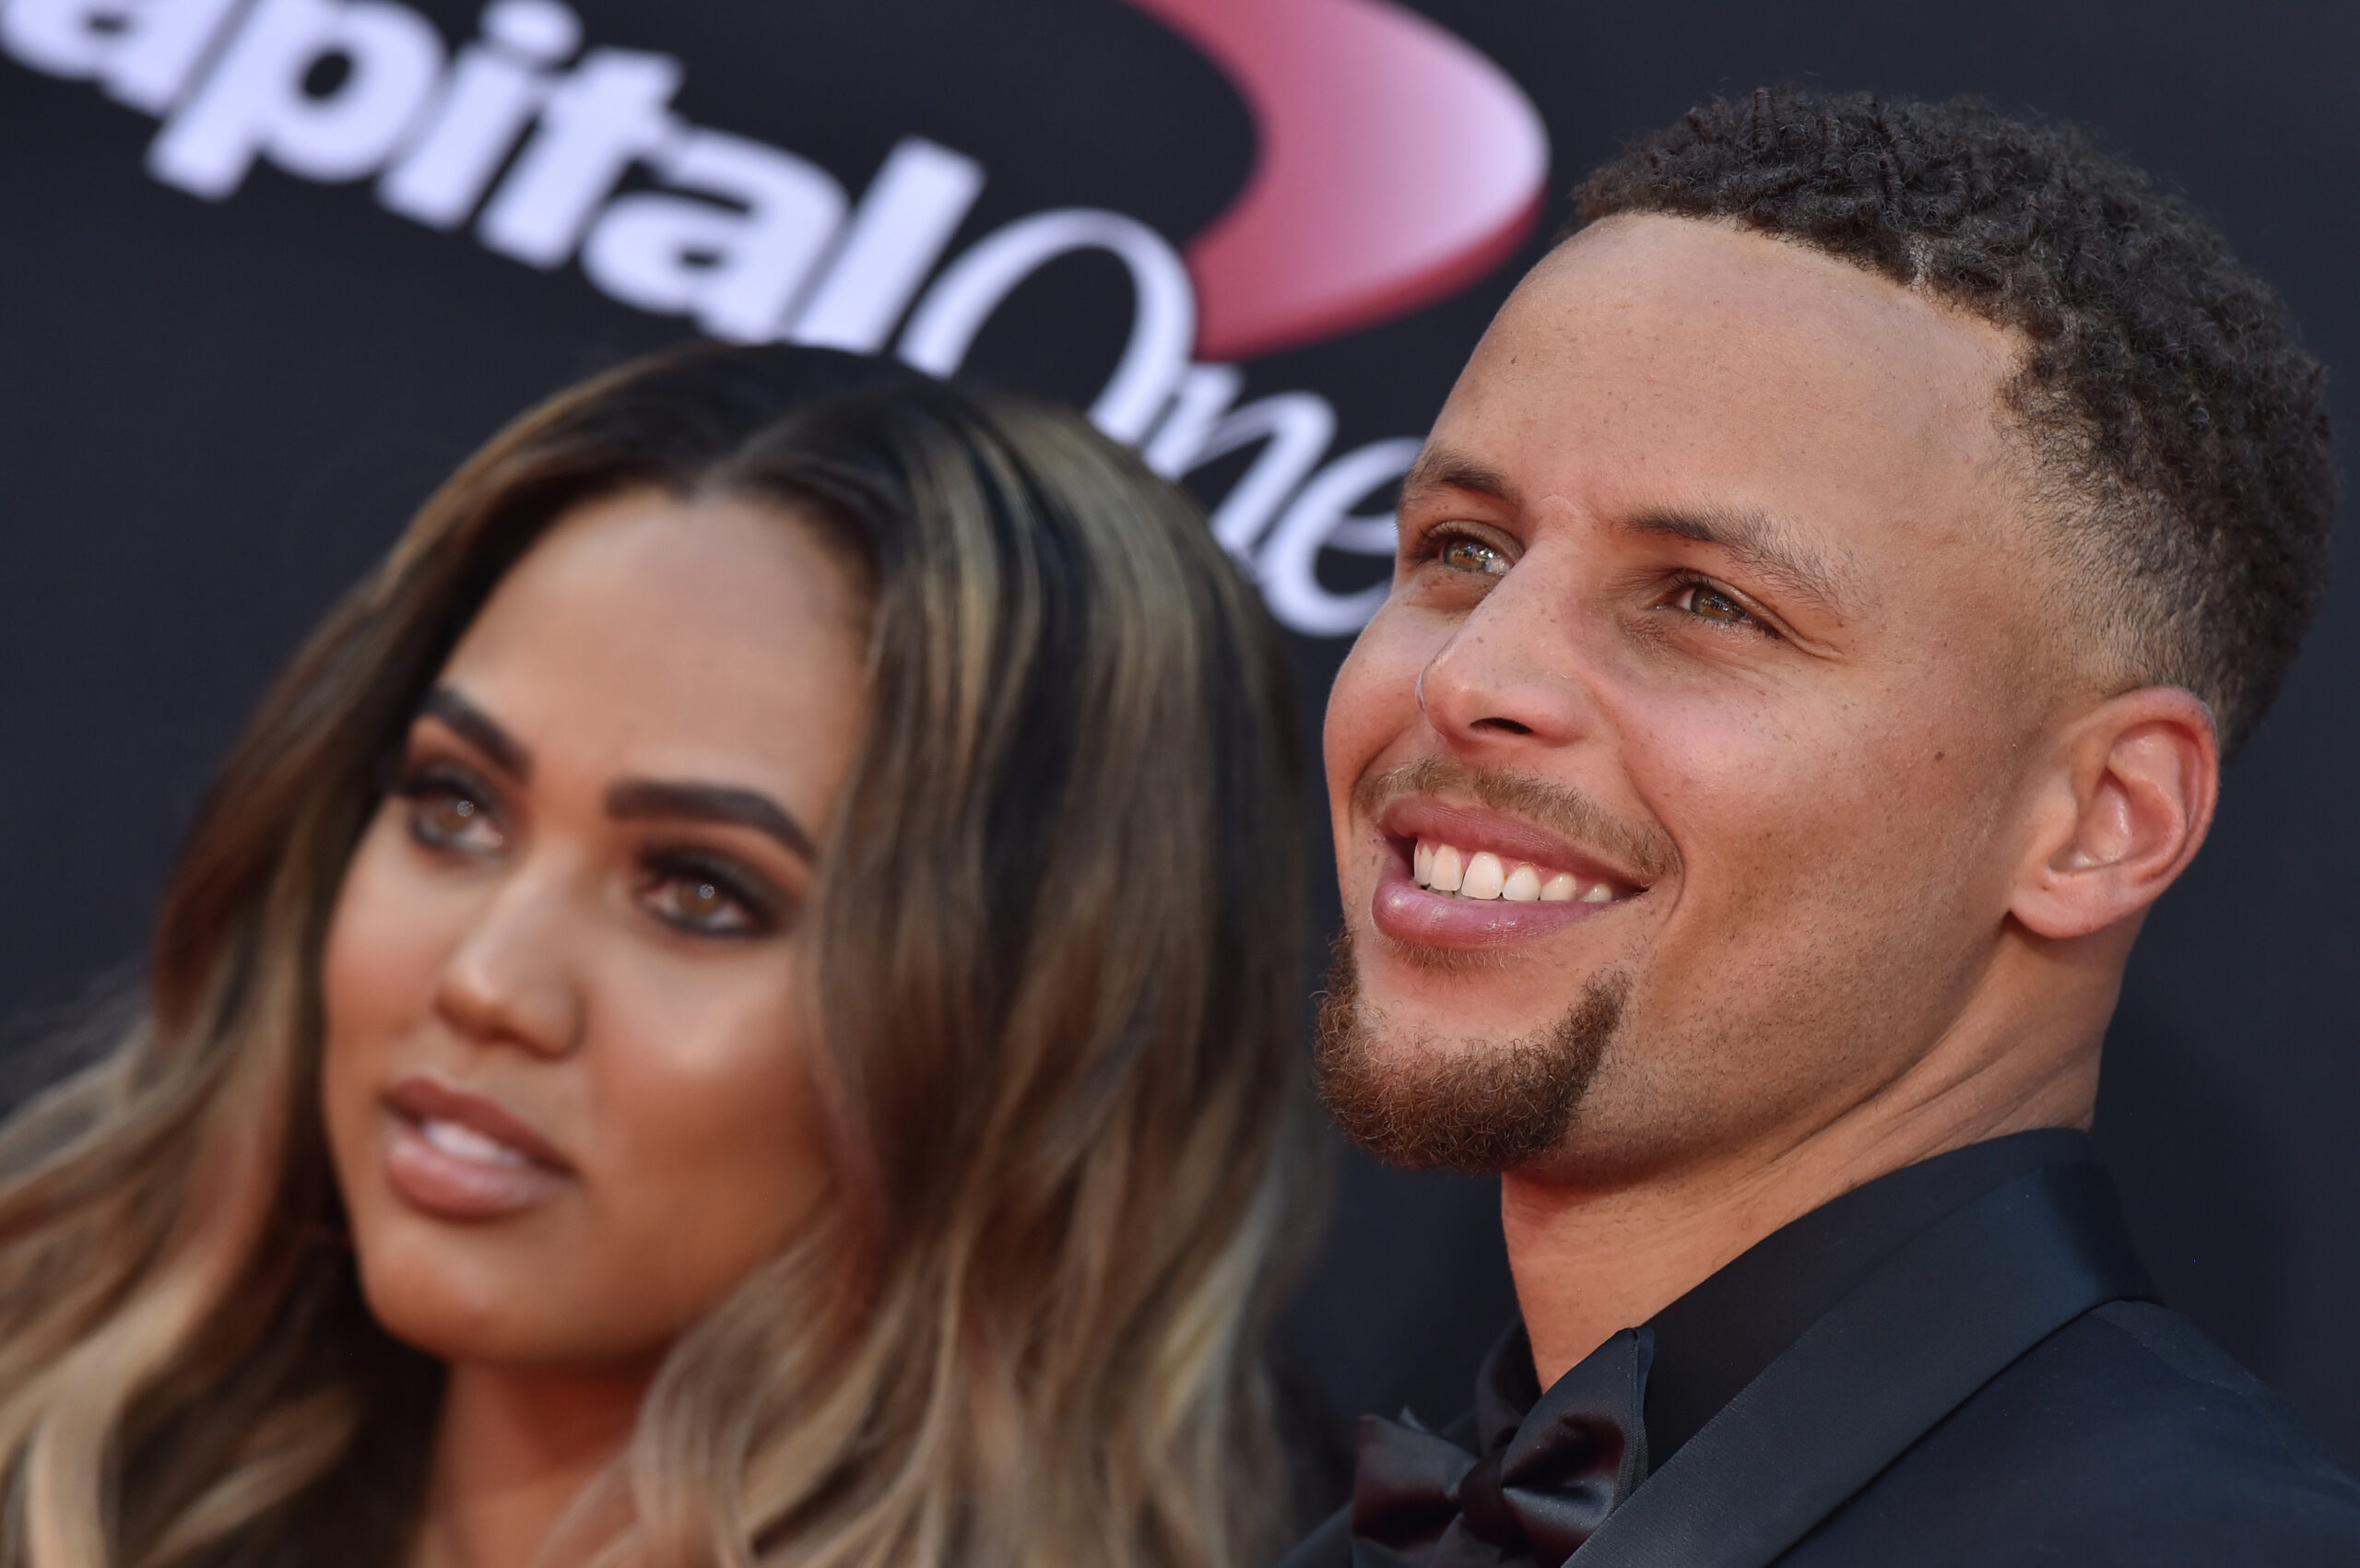 Steph Curry Says ‘Not in My Backyard’ to New Homes in Swanky Bay Area Suburb